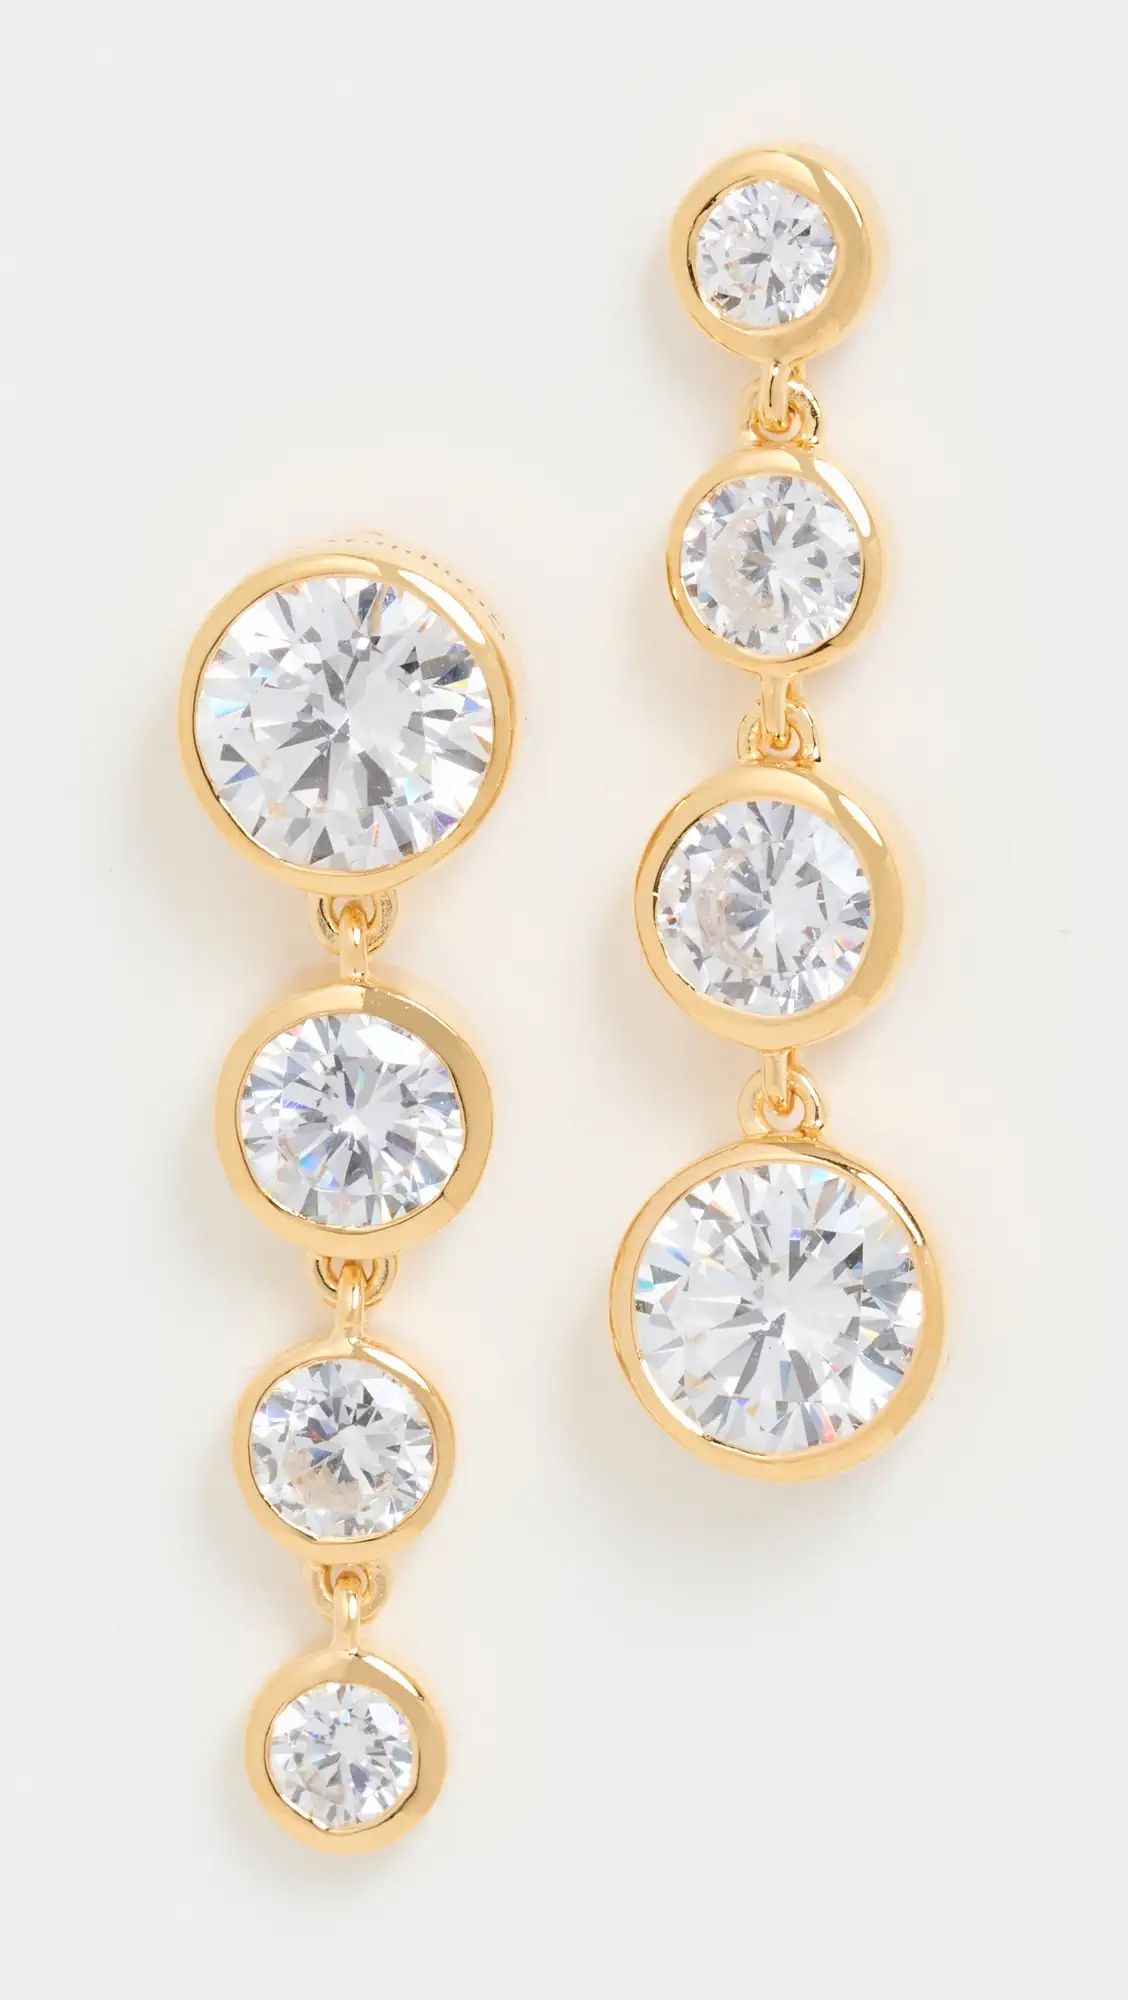 Completedworks Earrings with Cz | Shopbop | Shopbop